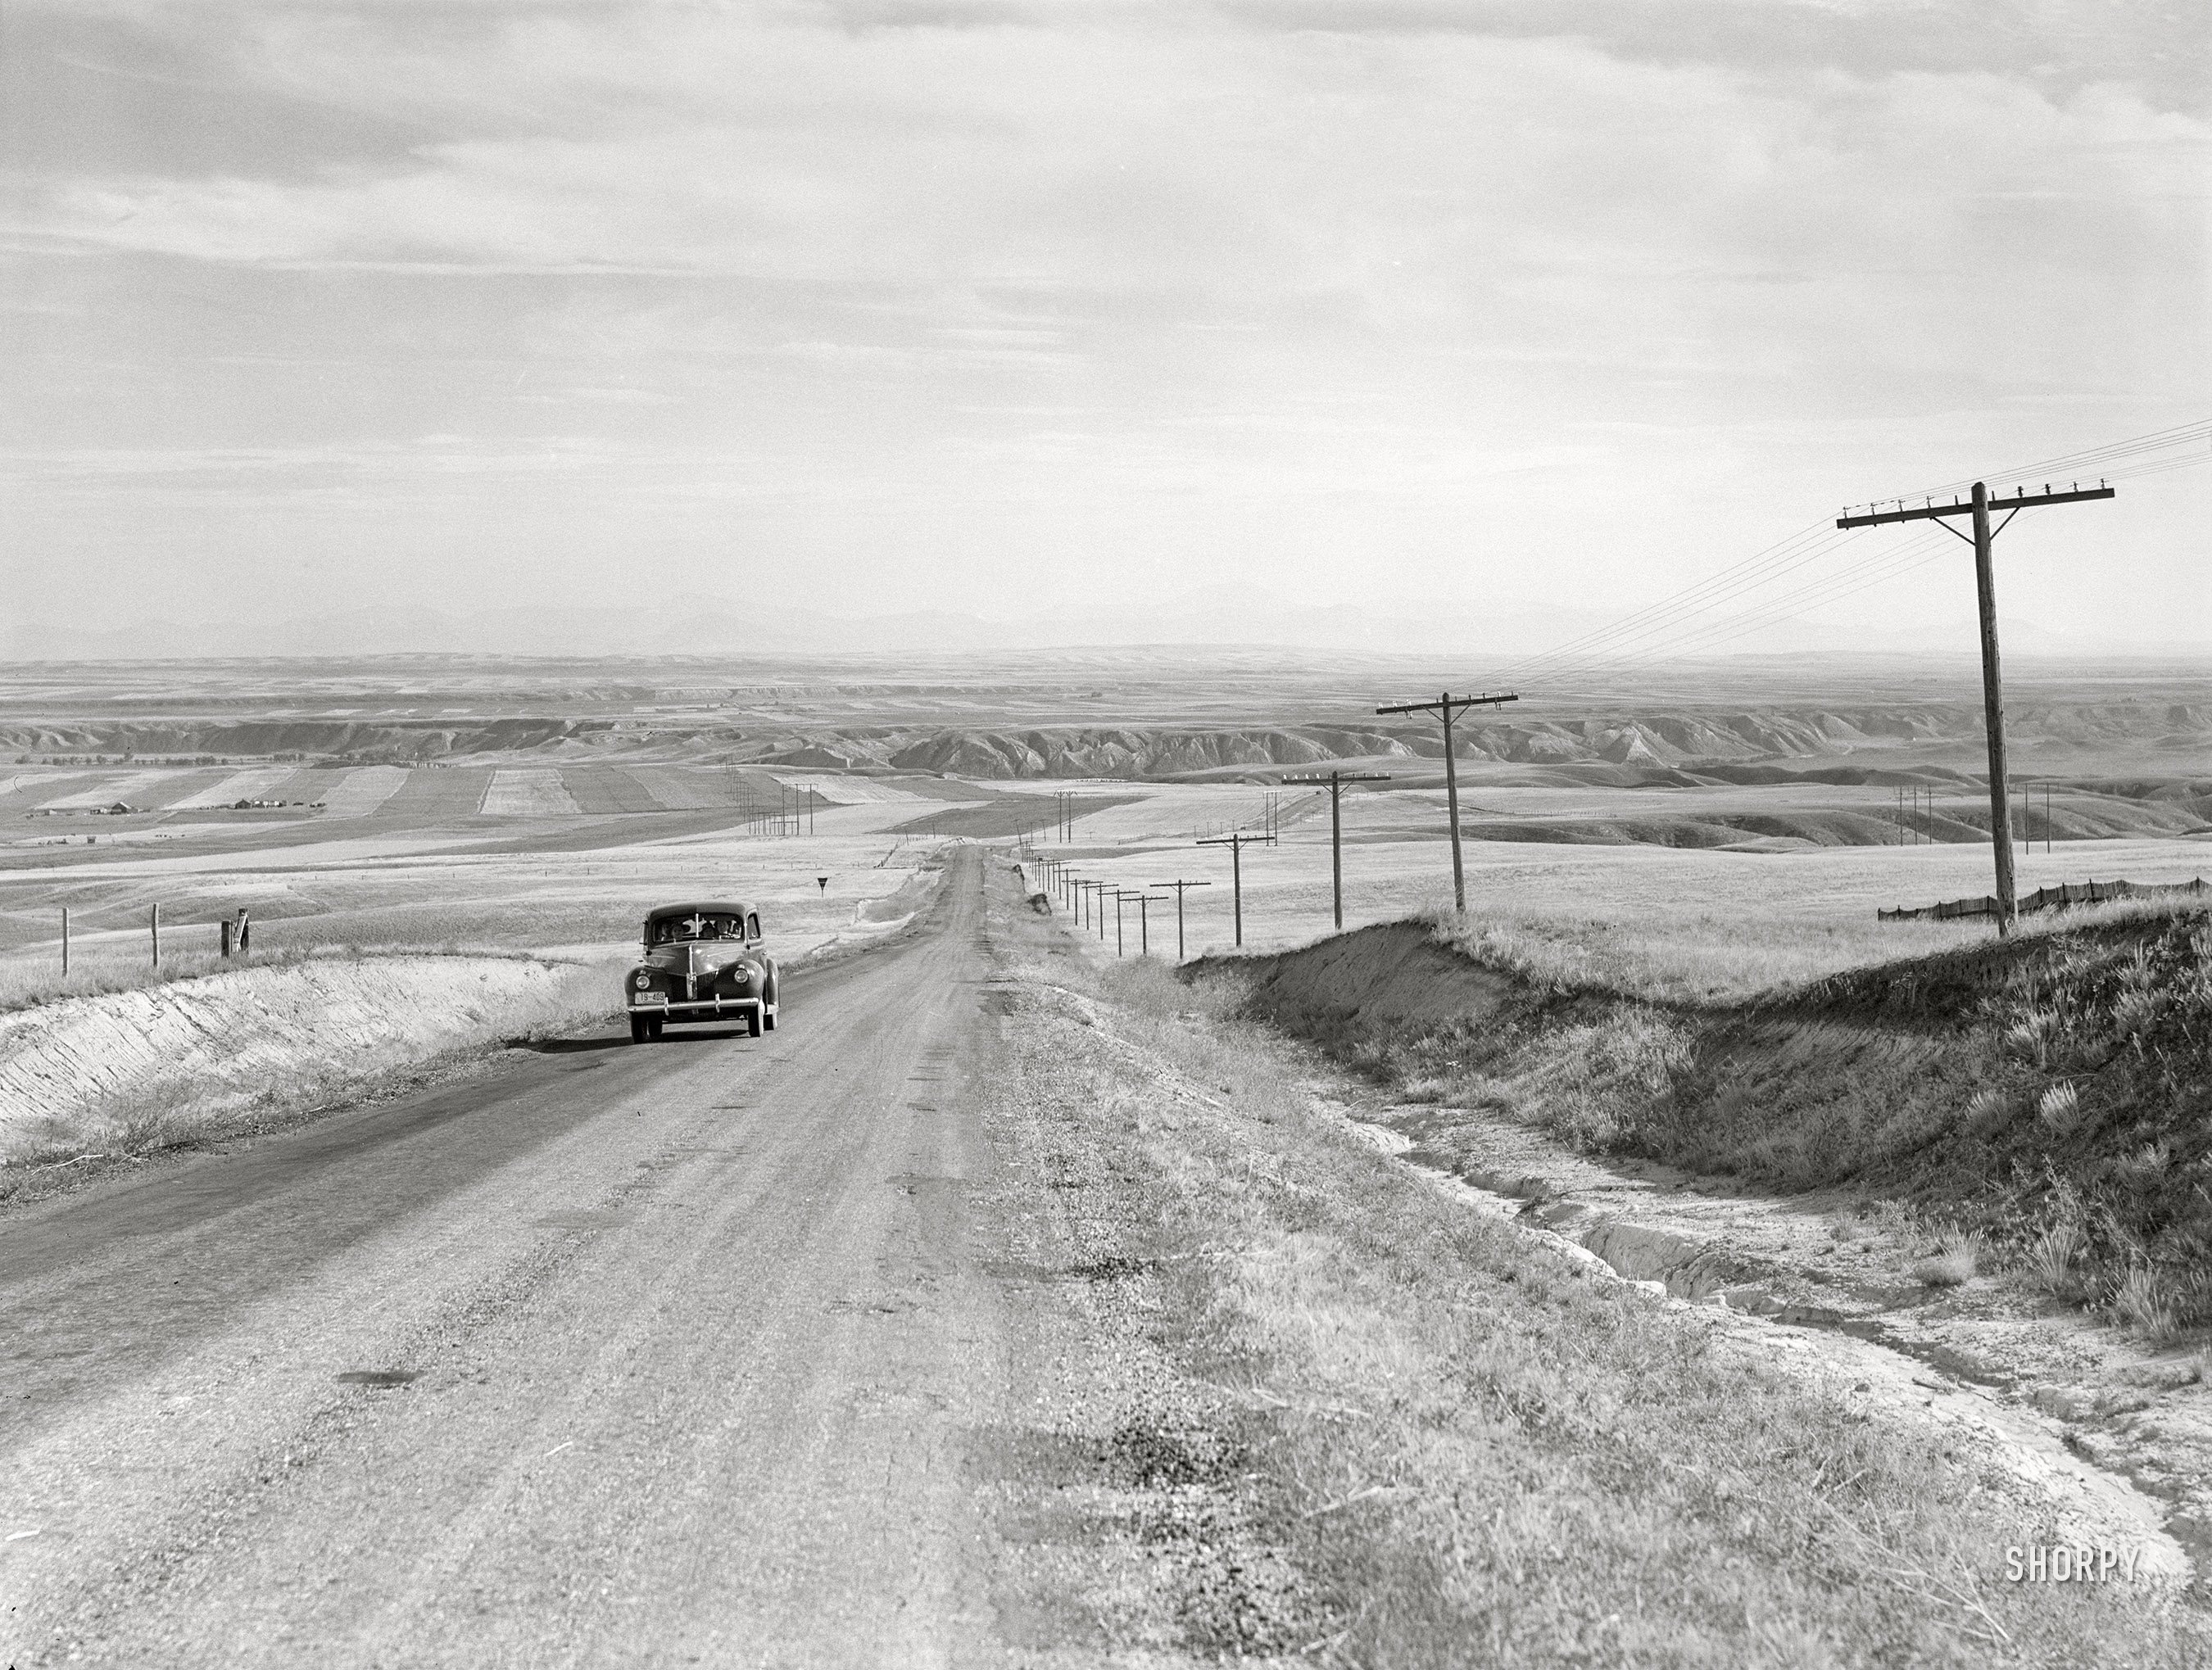 August 1941. "Highway near Havre, Montana." Medium format acetate negative by Marion Post Wolcott for the Farm Security Administration. View full size.